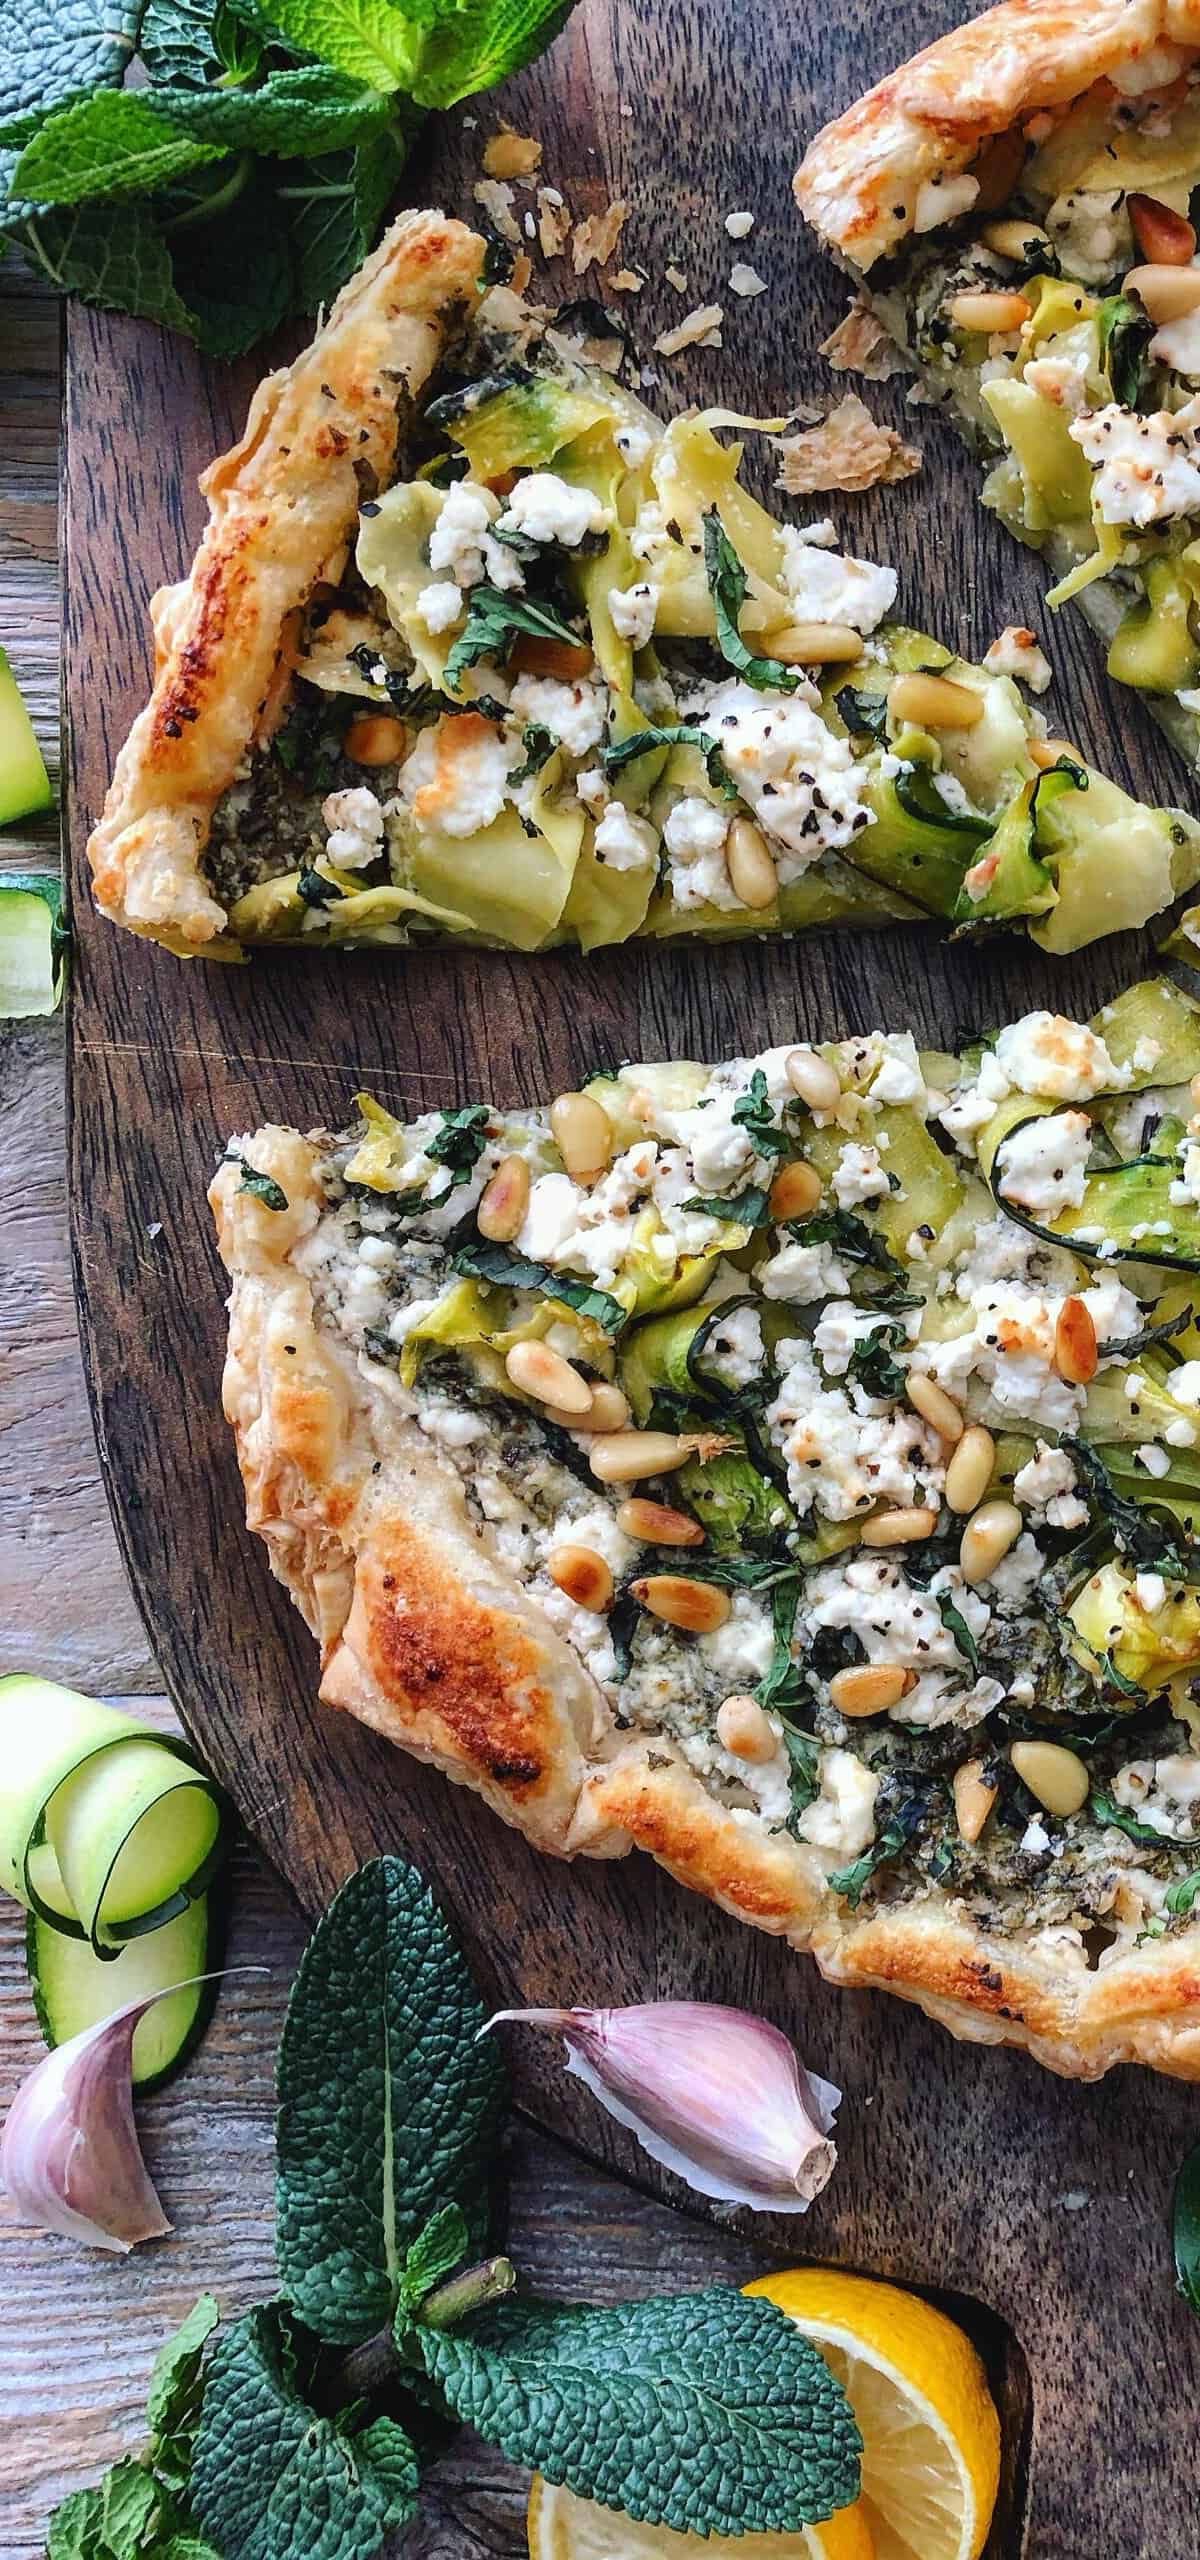  A delicious and savory zucchini tart with feta cheese and mint